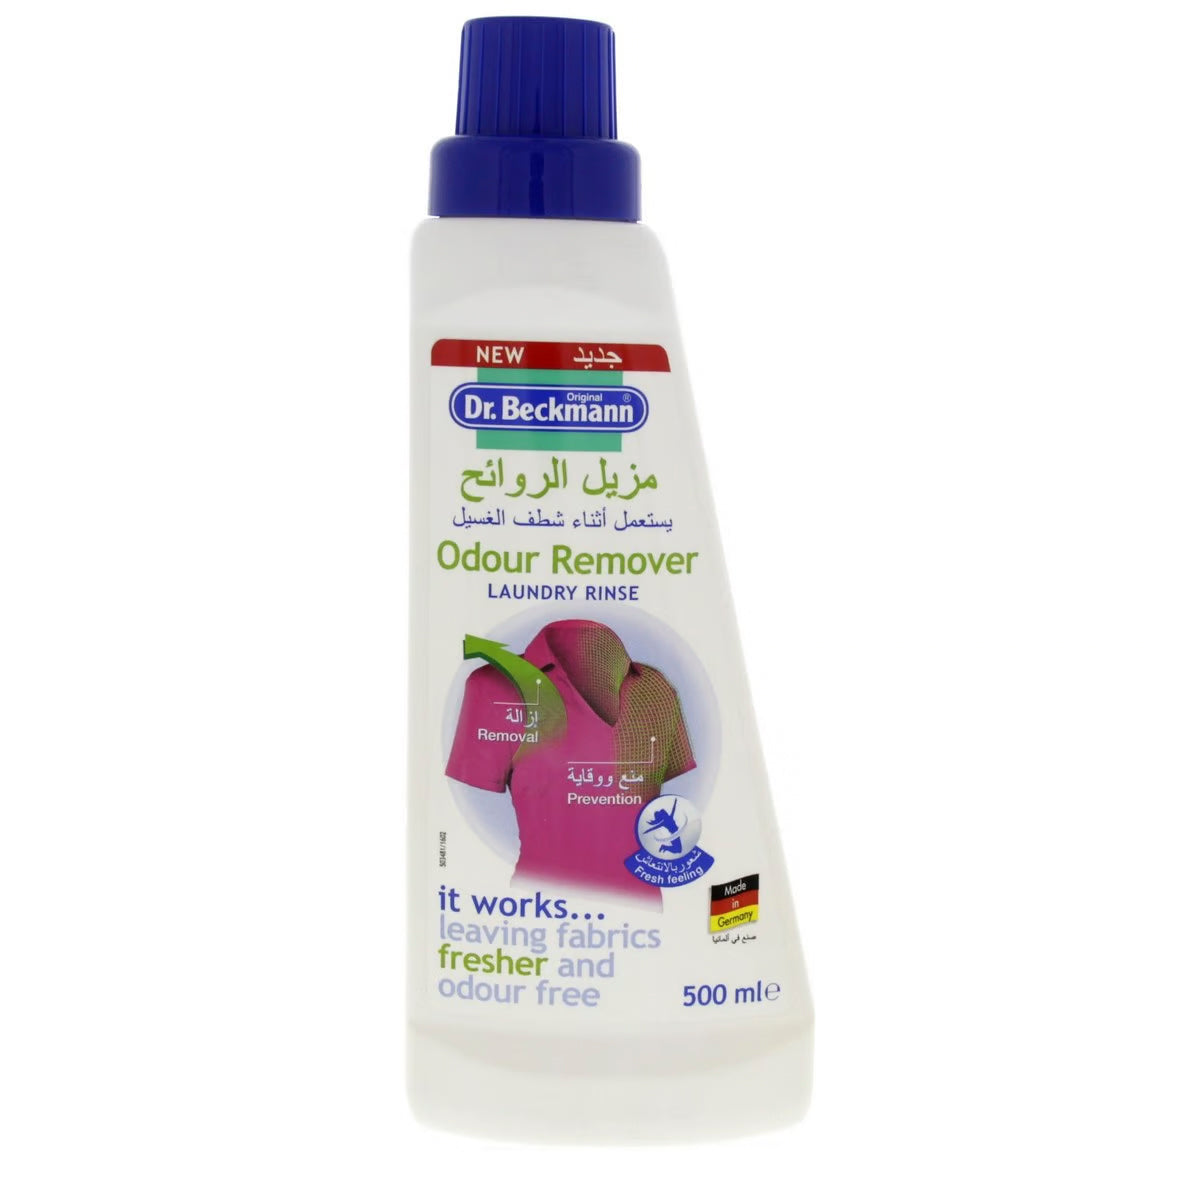 Odor Remover weight: 500 ml.